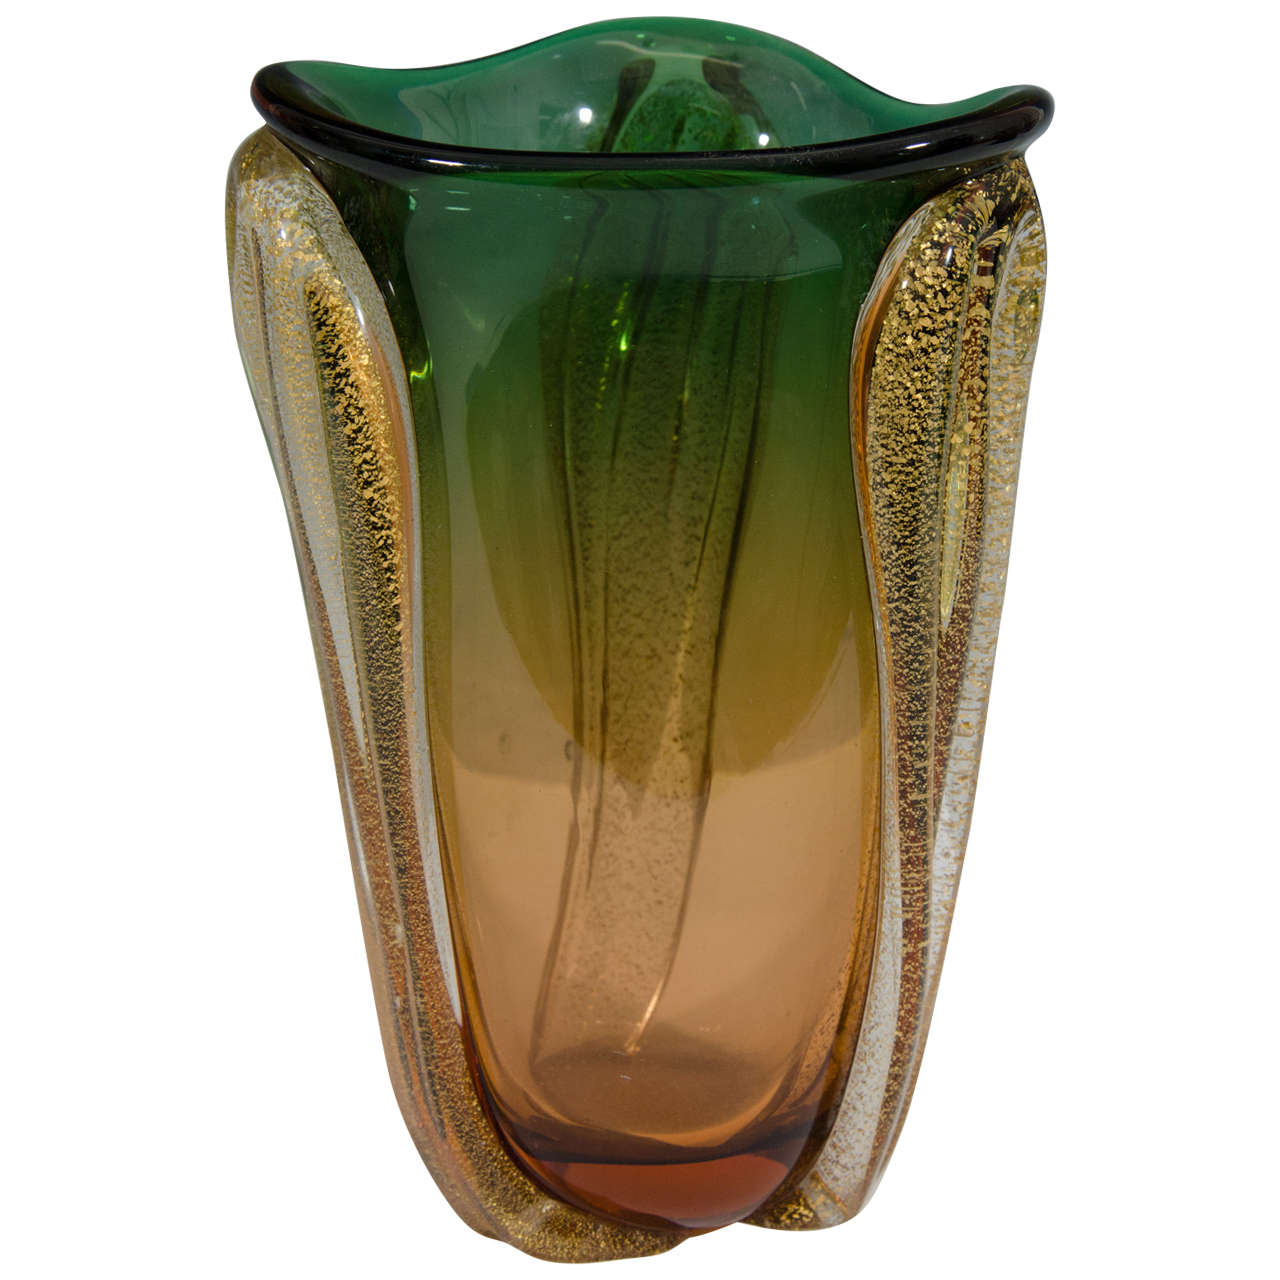 Midcentury Murano Glass Vase in Green and Amber with Gold Leaf